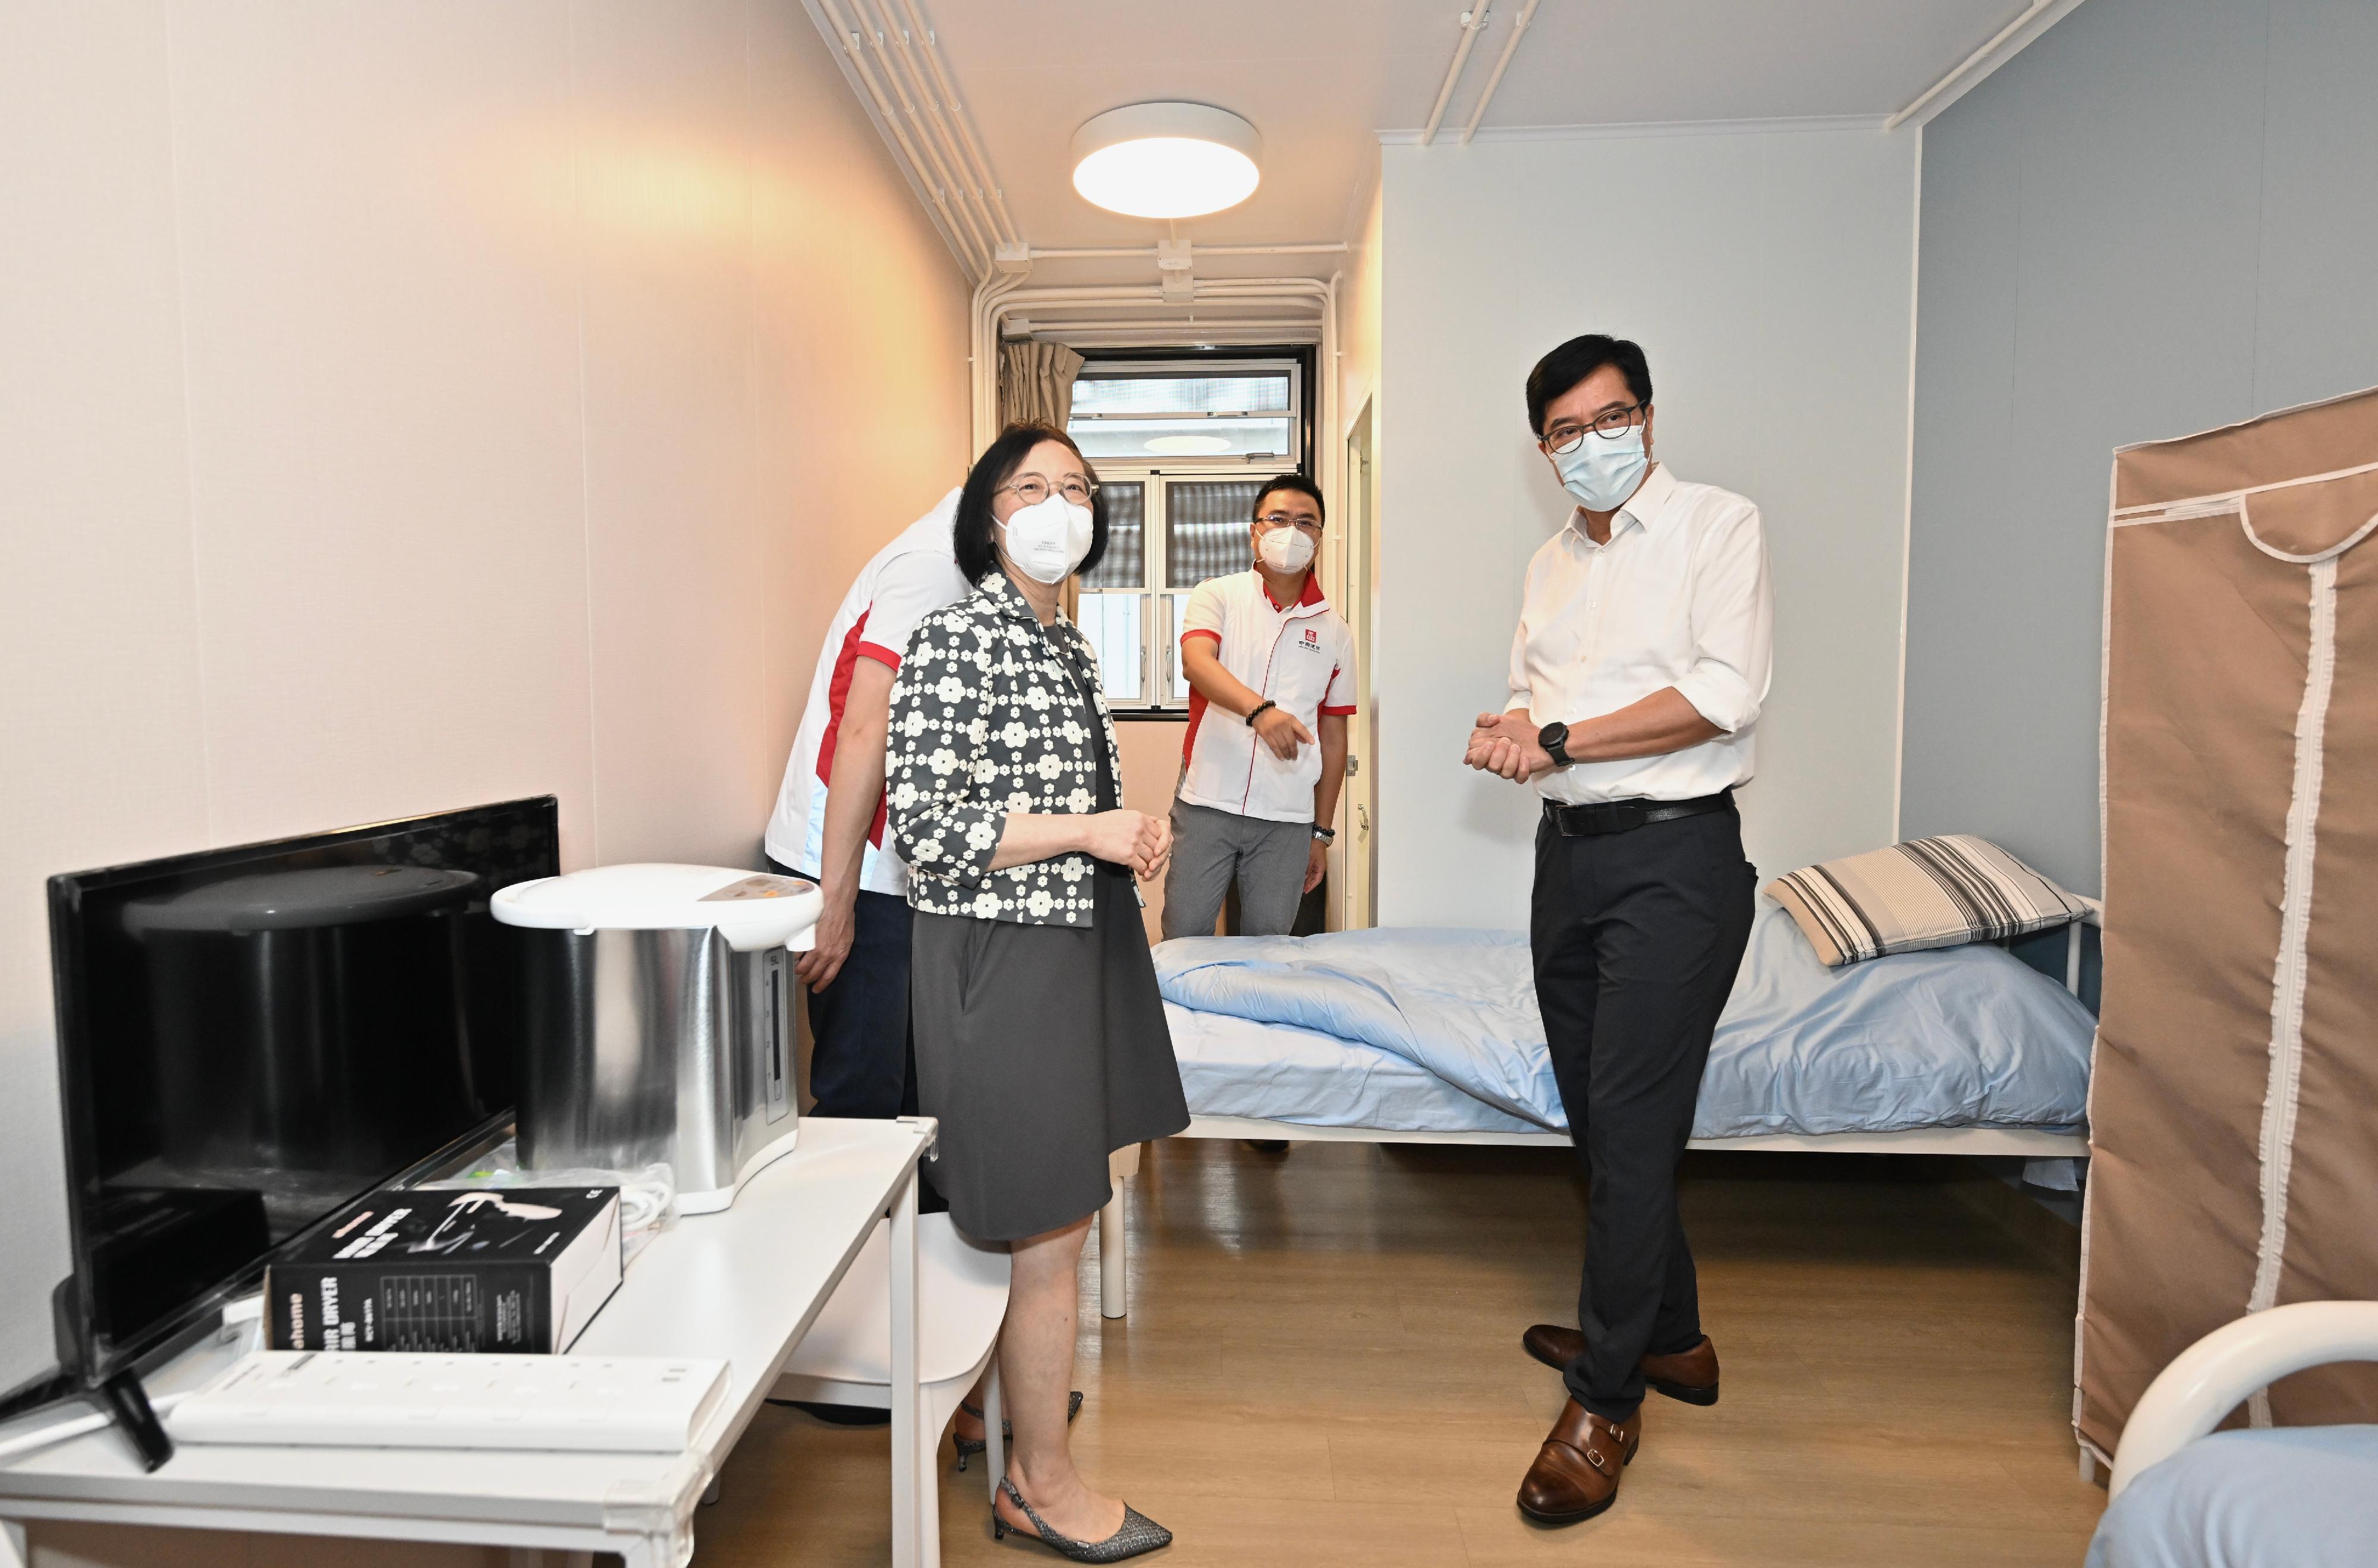 The Secretary for Development, Mr Michael Wong, and the Secretary for Food and Health, Professor Sophia Chan, visited the Kai Tak Community Isolation Facility this afternoon (May 27). Photo shows Mr Wong (first right) and Professor Chan (first left), accompanied by a representative of the contractor, touring an isolation unit.